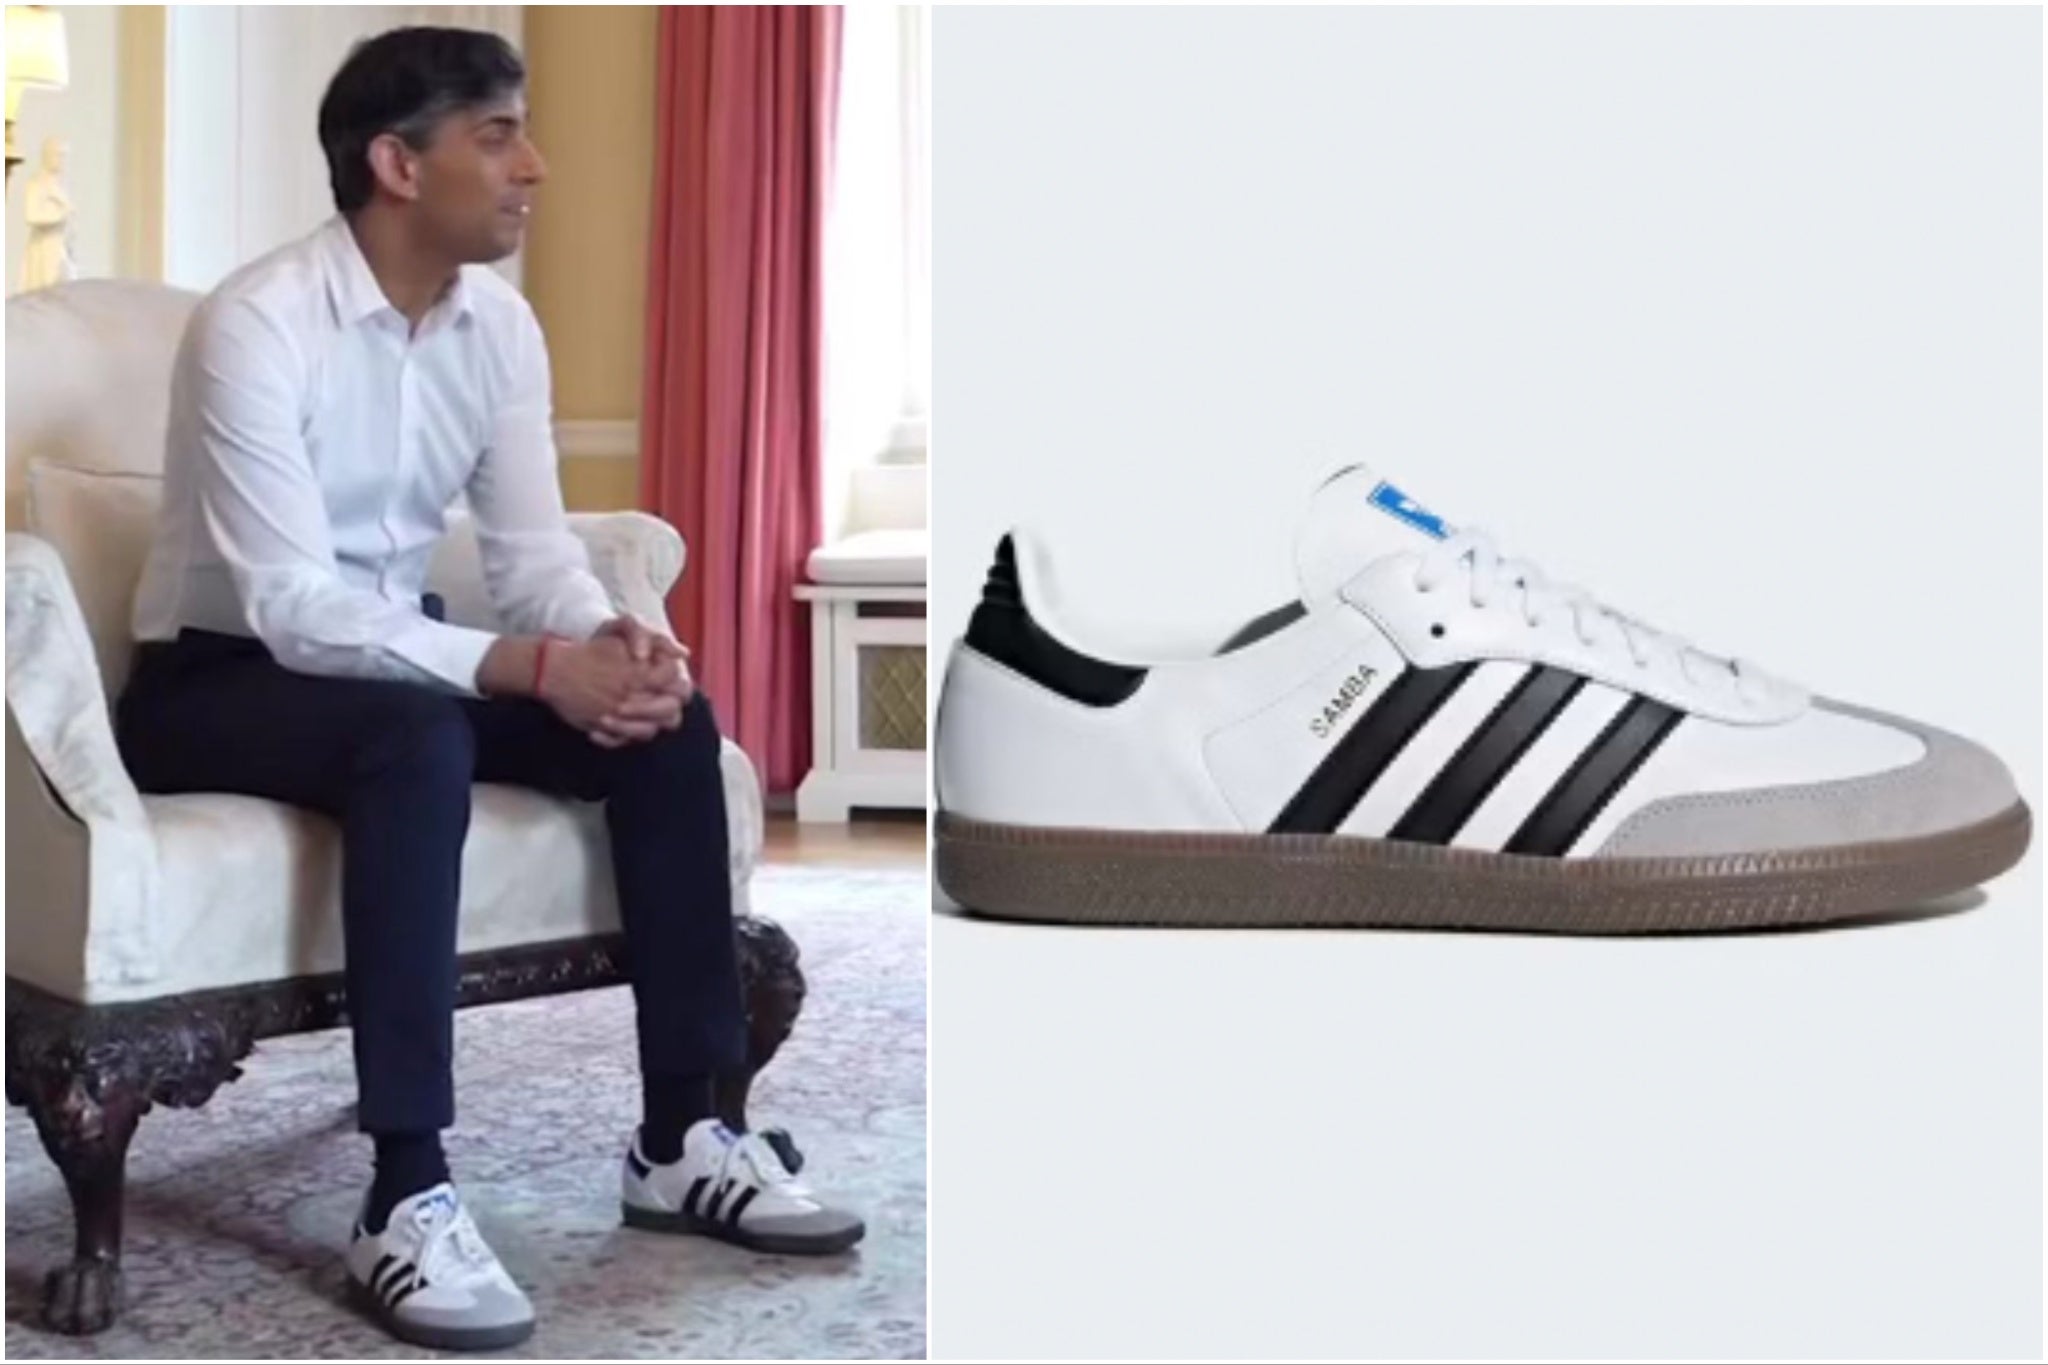 Sunak was accused of ‘ruining’ the adidas shoes for the ‘Samba community’